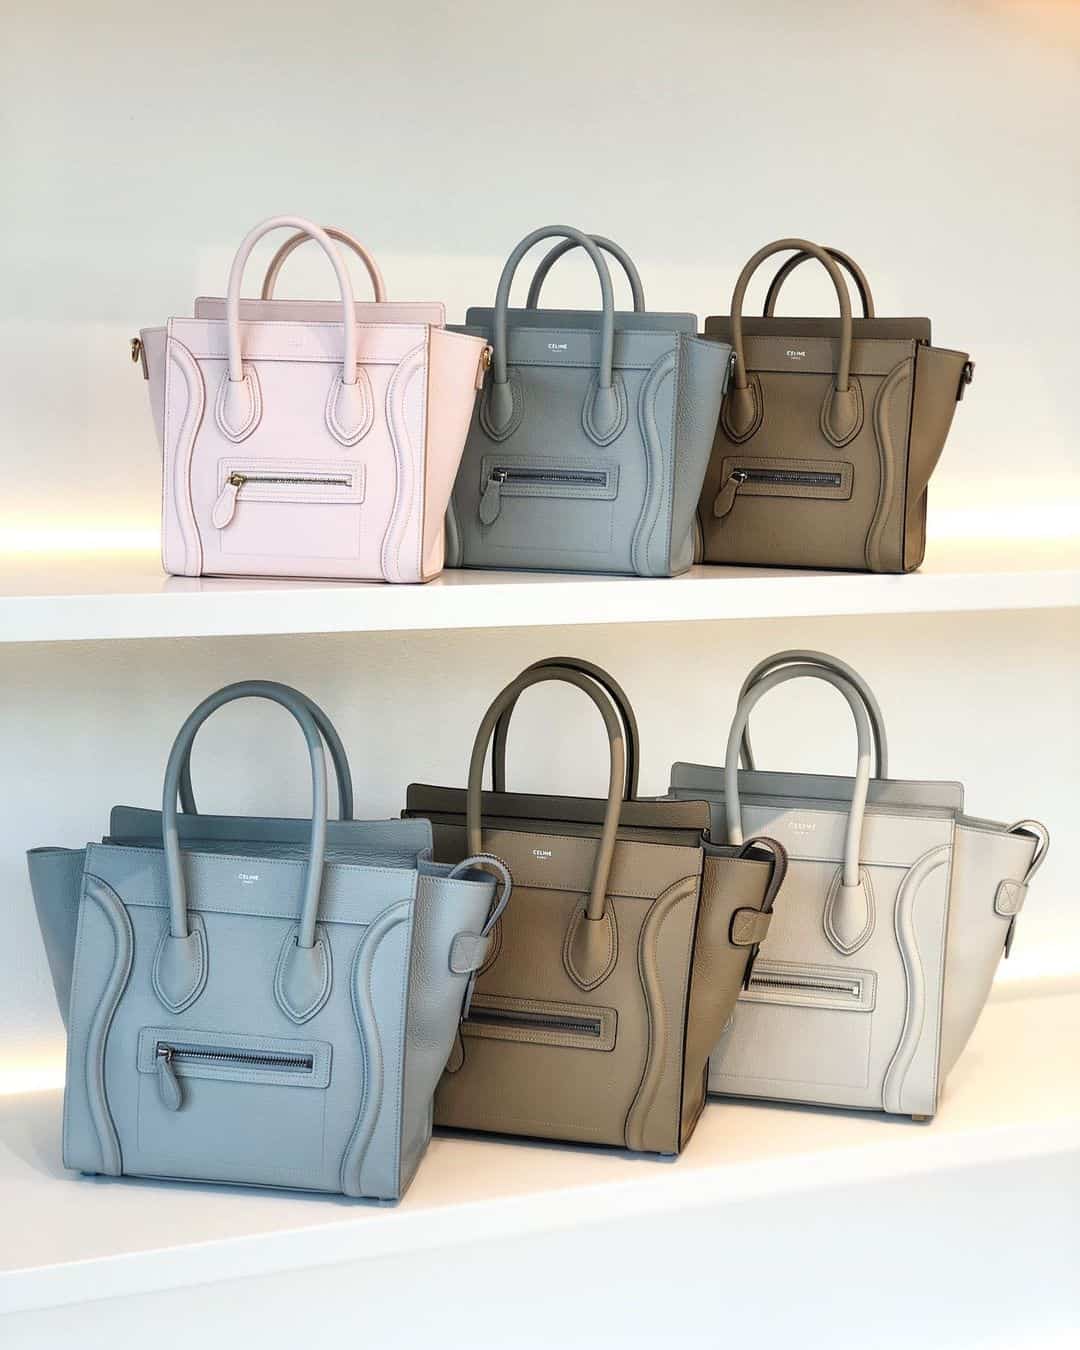 Where to buy a Celine Luggage Tote Bag Discounted